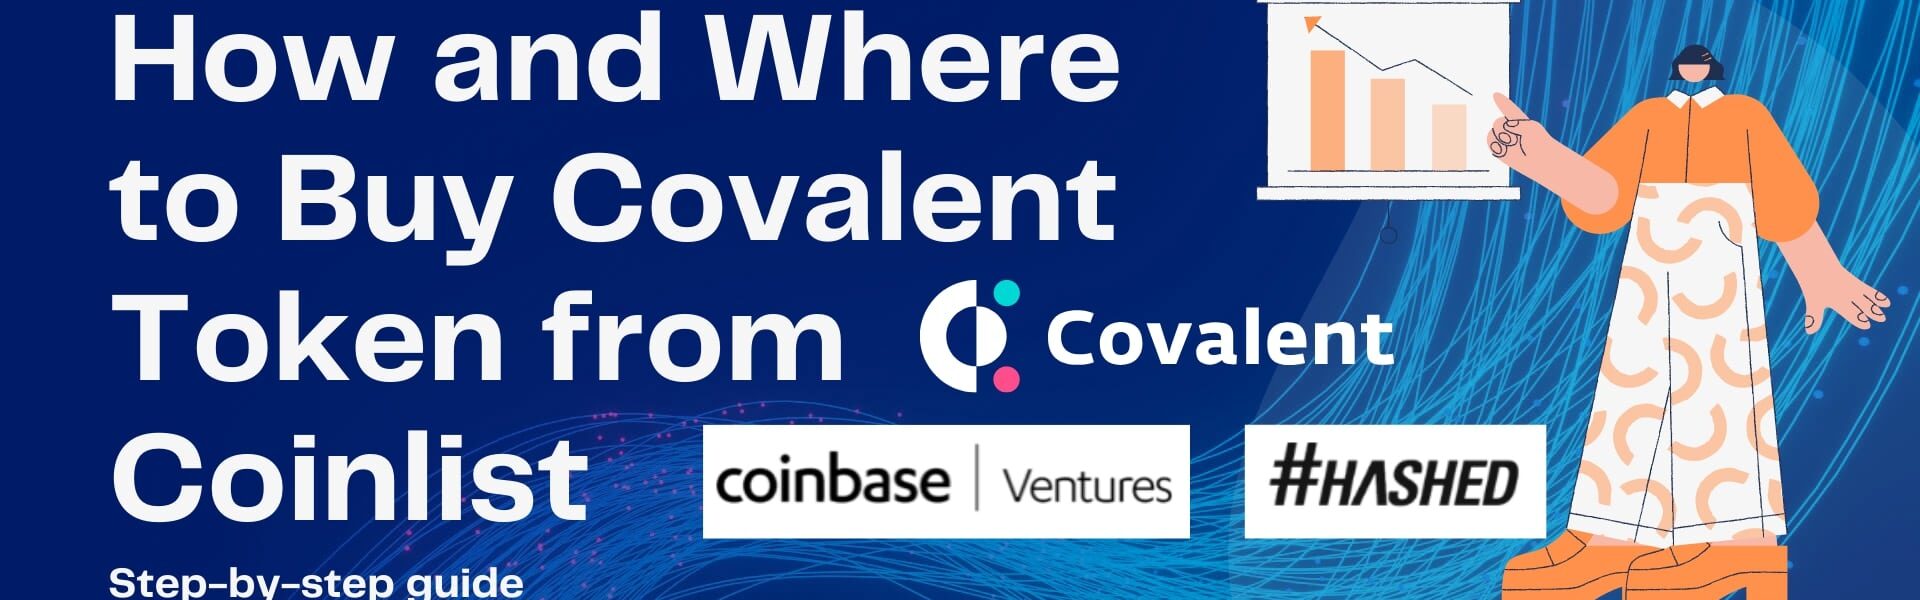 How and Where to buy Covalent token CQT ICO presale in Coinlist